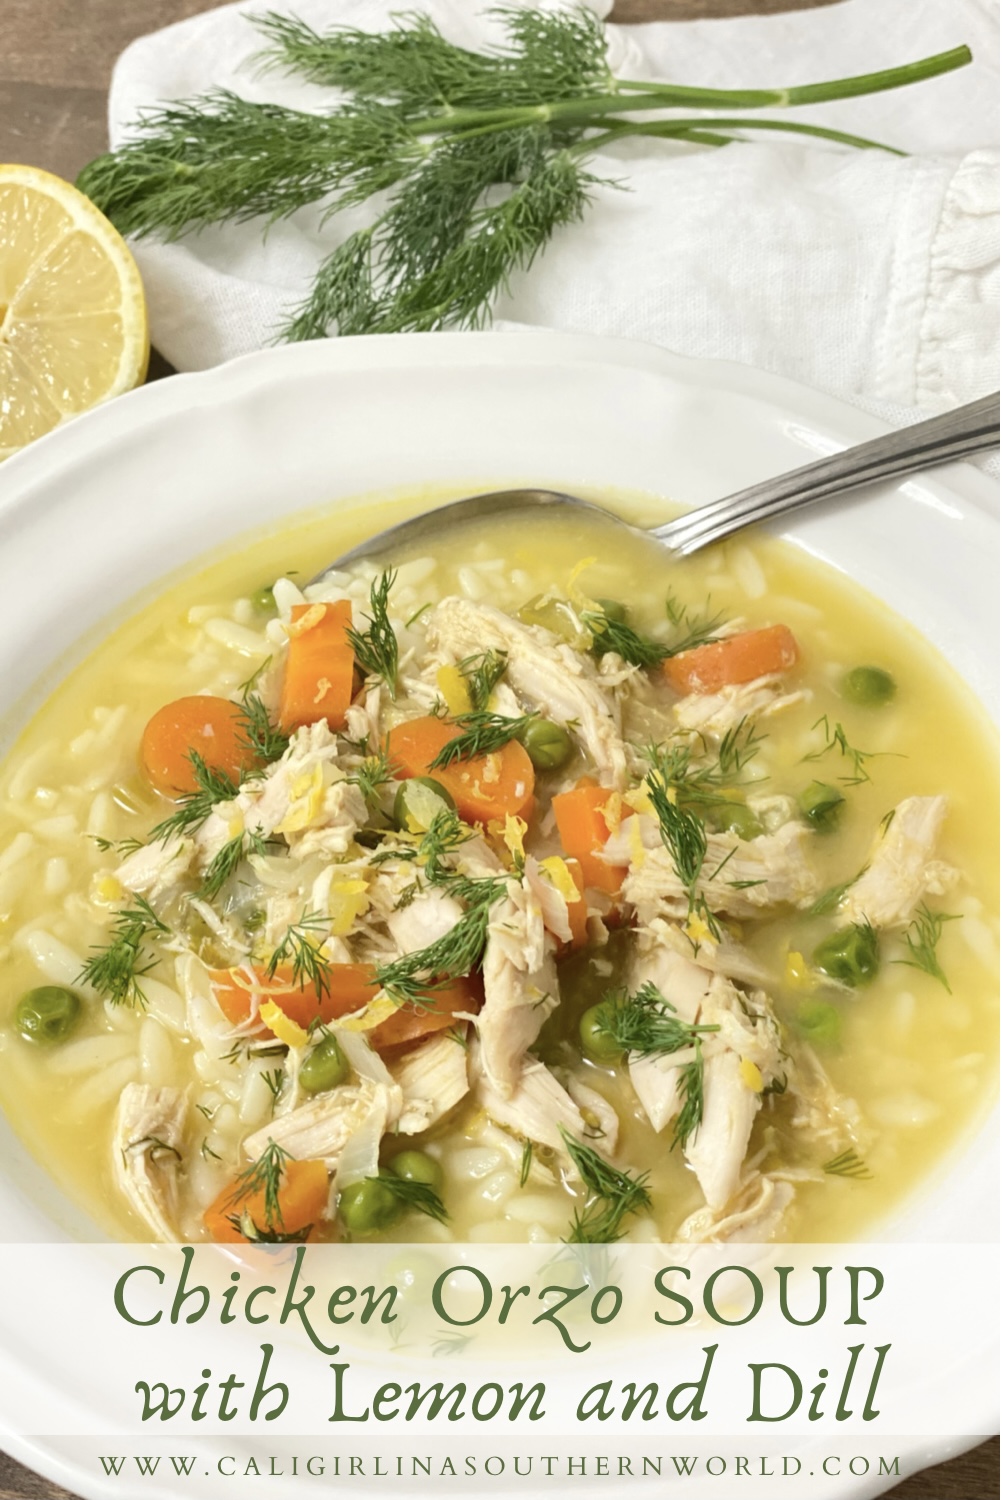 Pinterest Pin for Chicken Orzo Soup with Lemon and Dill